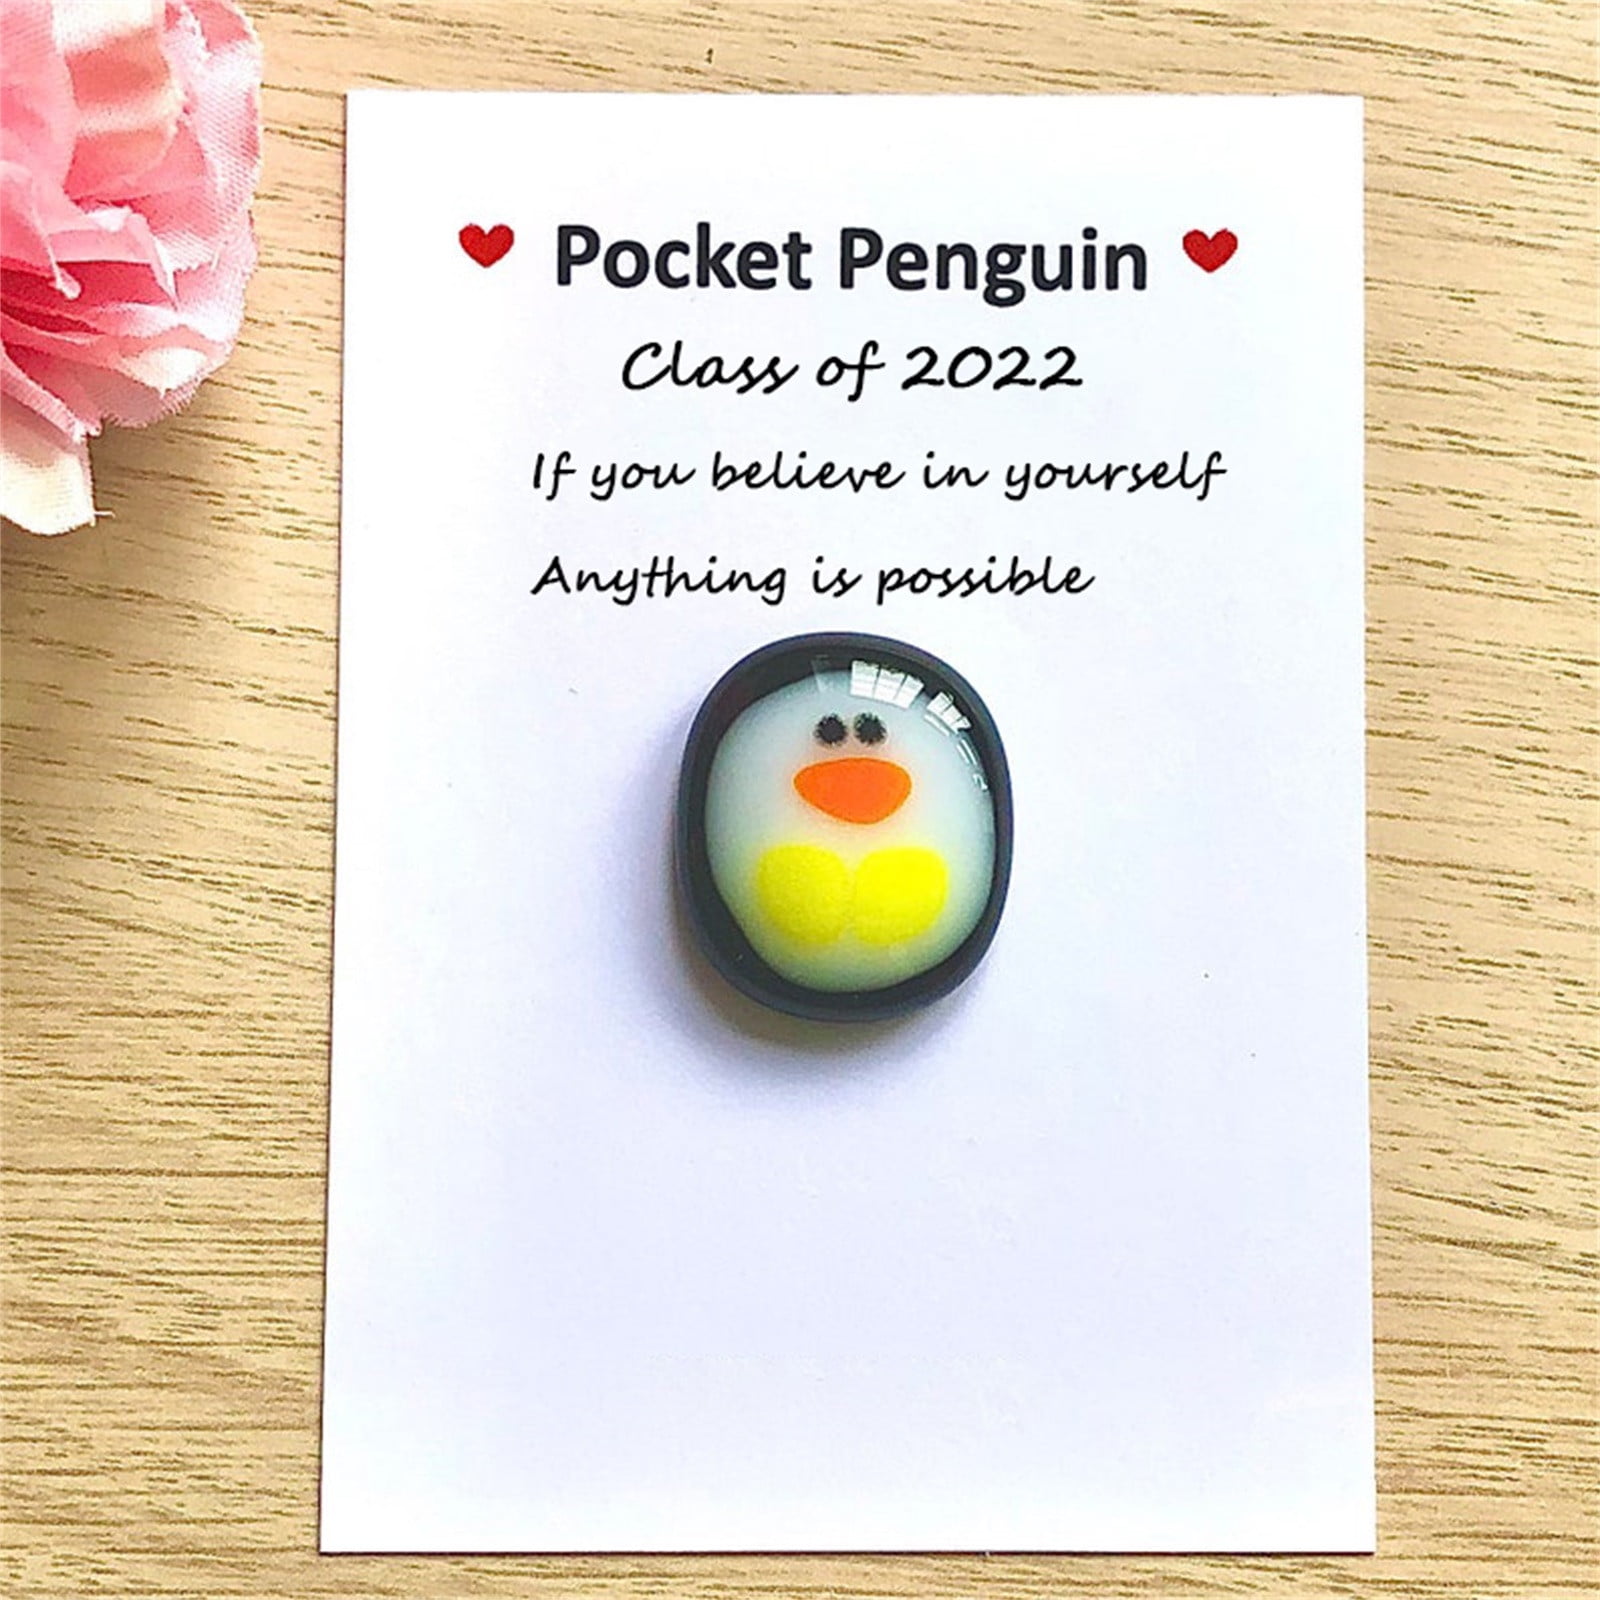 Penguin Keychain Always Be Yourself Unless You Can Be A Penguin Keychain  Inspirational Penguin Gifts Penguin Lover Gift